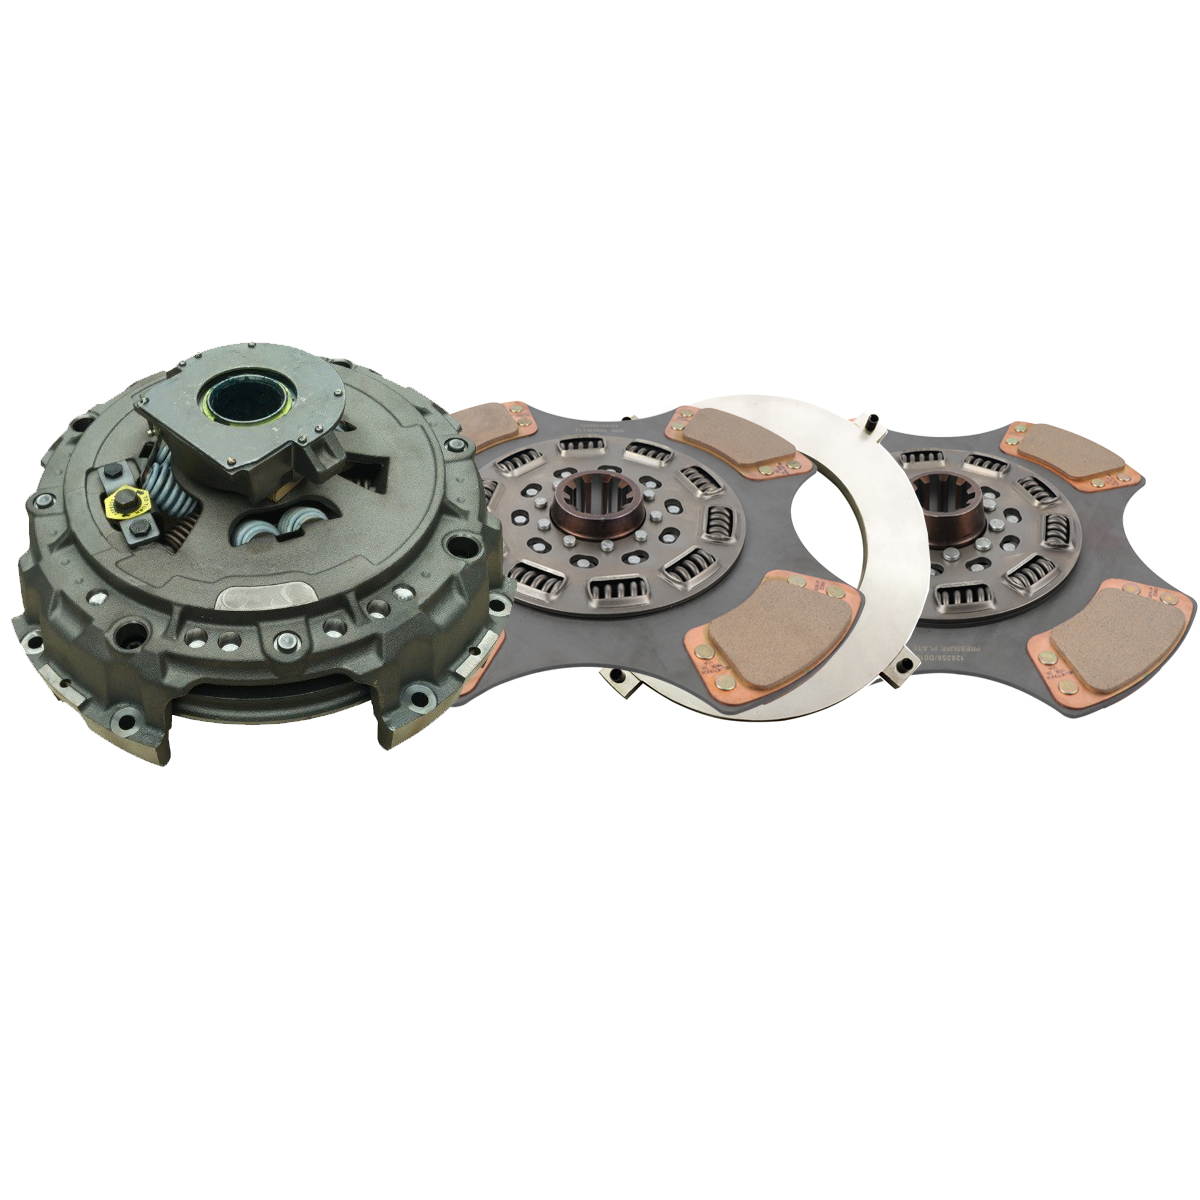 108391-74 15-1/2 Terbon Heavy Duty Truck Parts Pull-Type Clutch Assembly Clutch Kit